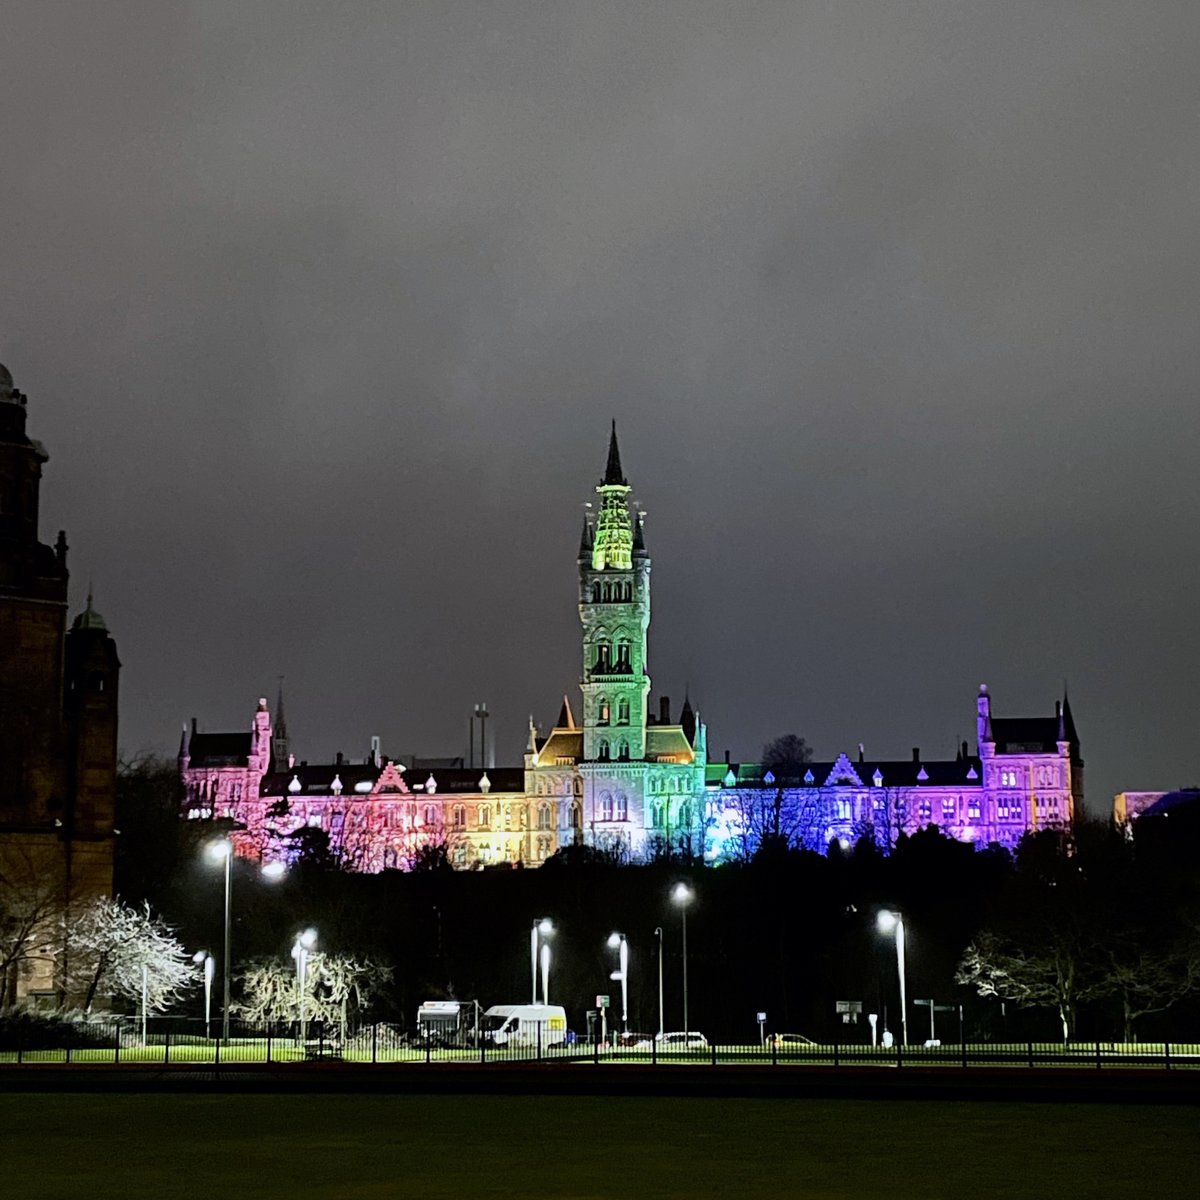 The UofG Gilbert Scott building is illuminated in rainbow colours to mark the start of LGBTQ+ History Month. 🏳️‍🌈 #OneTeamUofG The building will be lit up until Thursday 8 Feb. #LGBTQHM aims to educate people about the history of the LGBTQ+ rights movement & to promote equality.